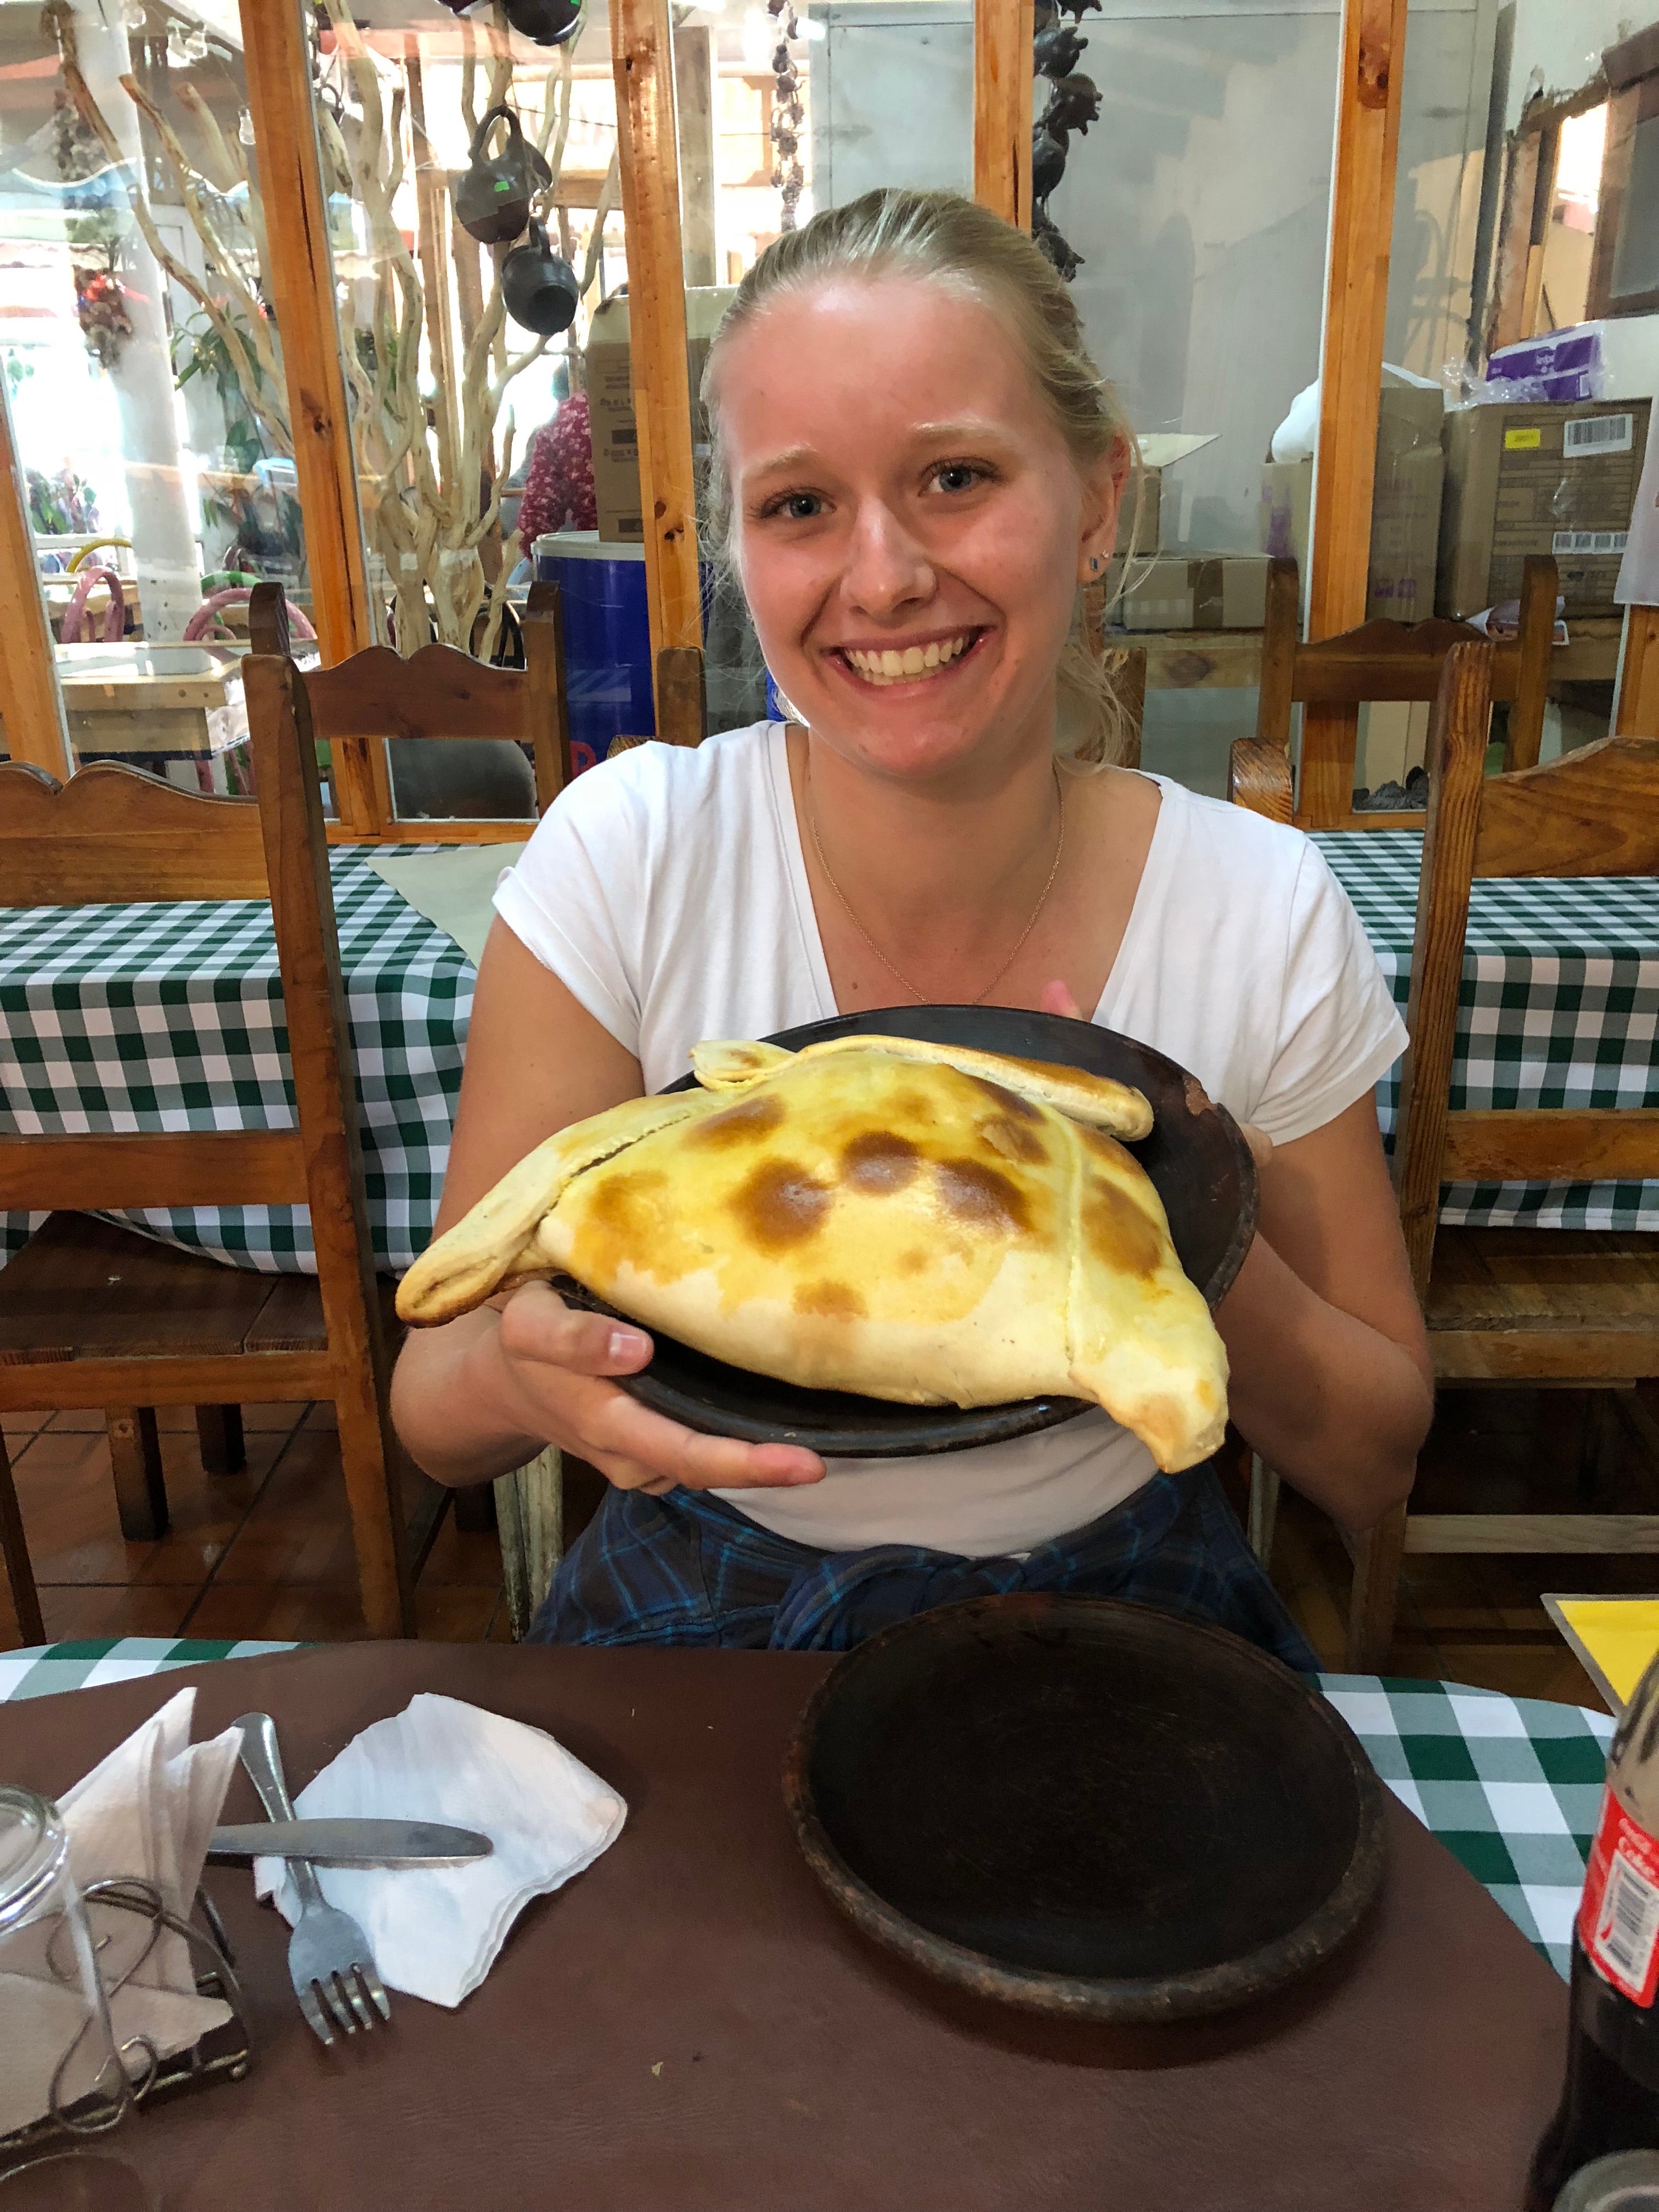 Sarah holding up a plate with a giant empanada